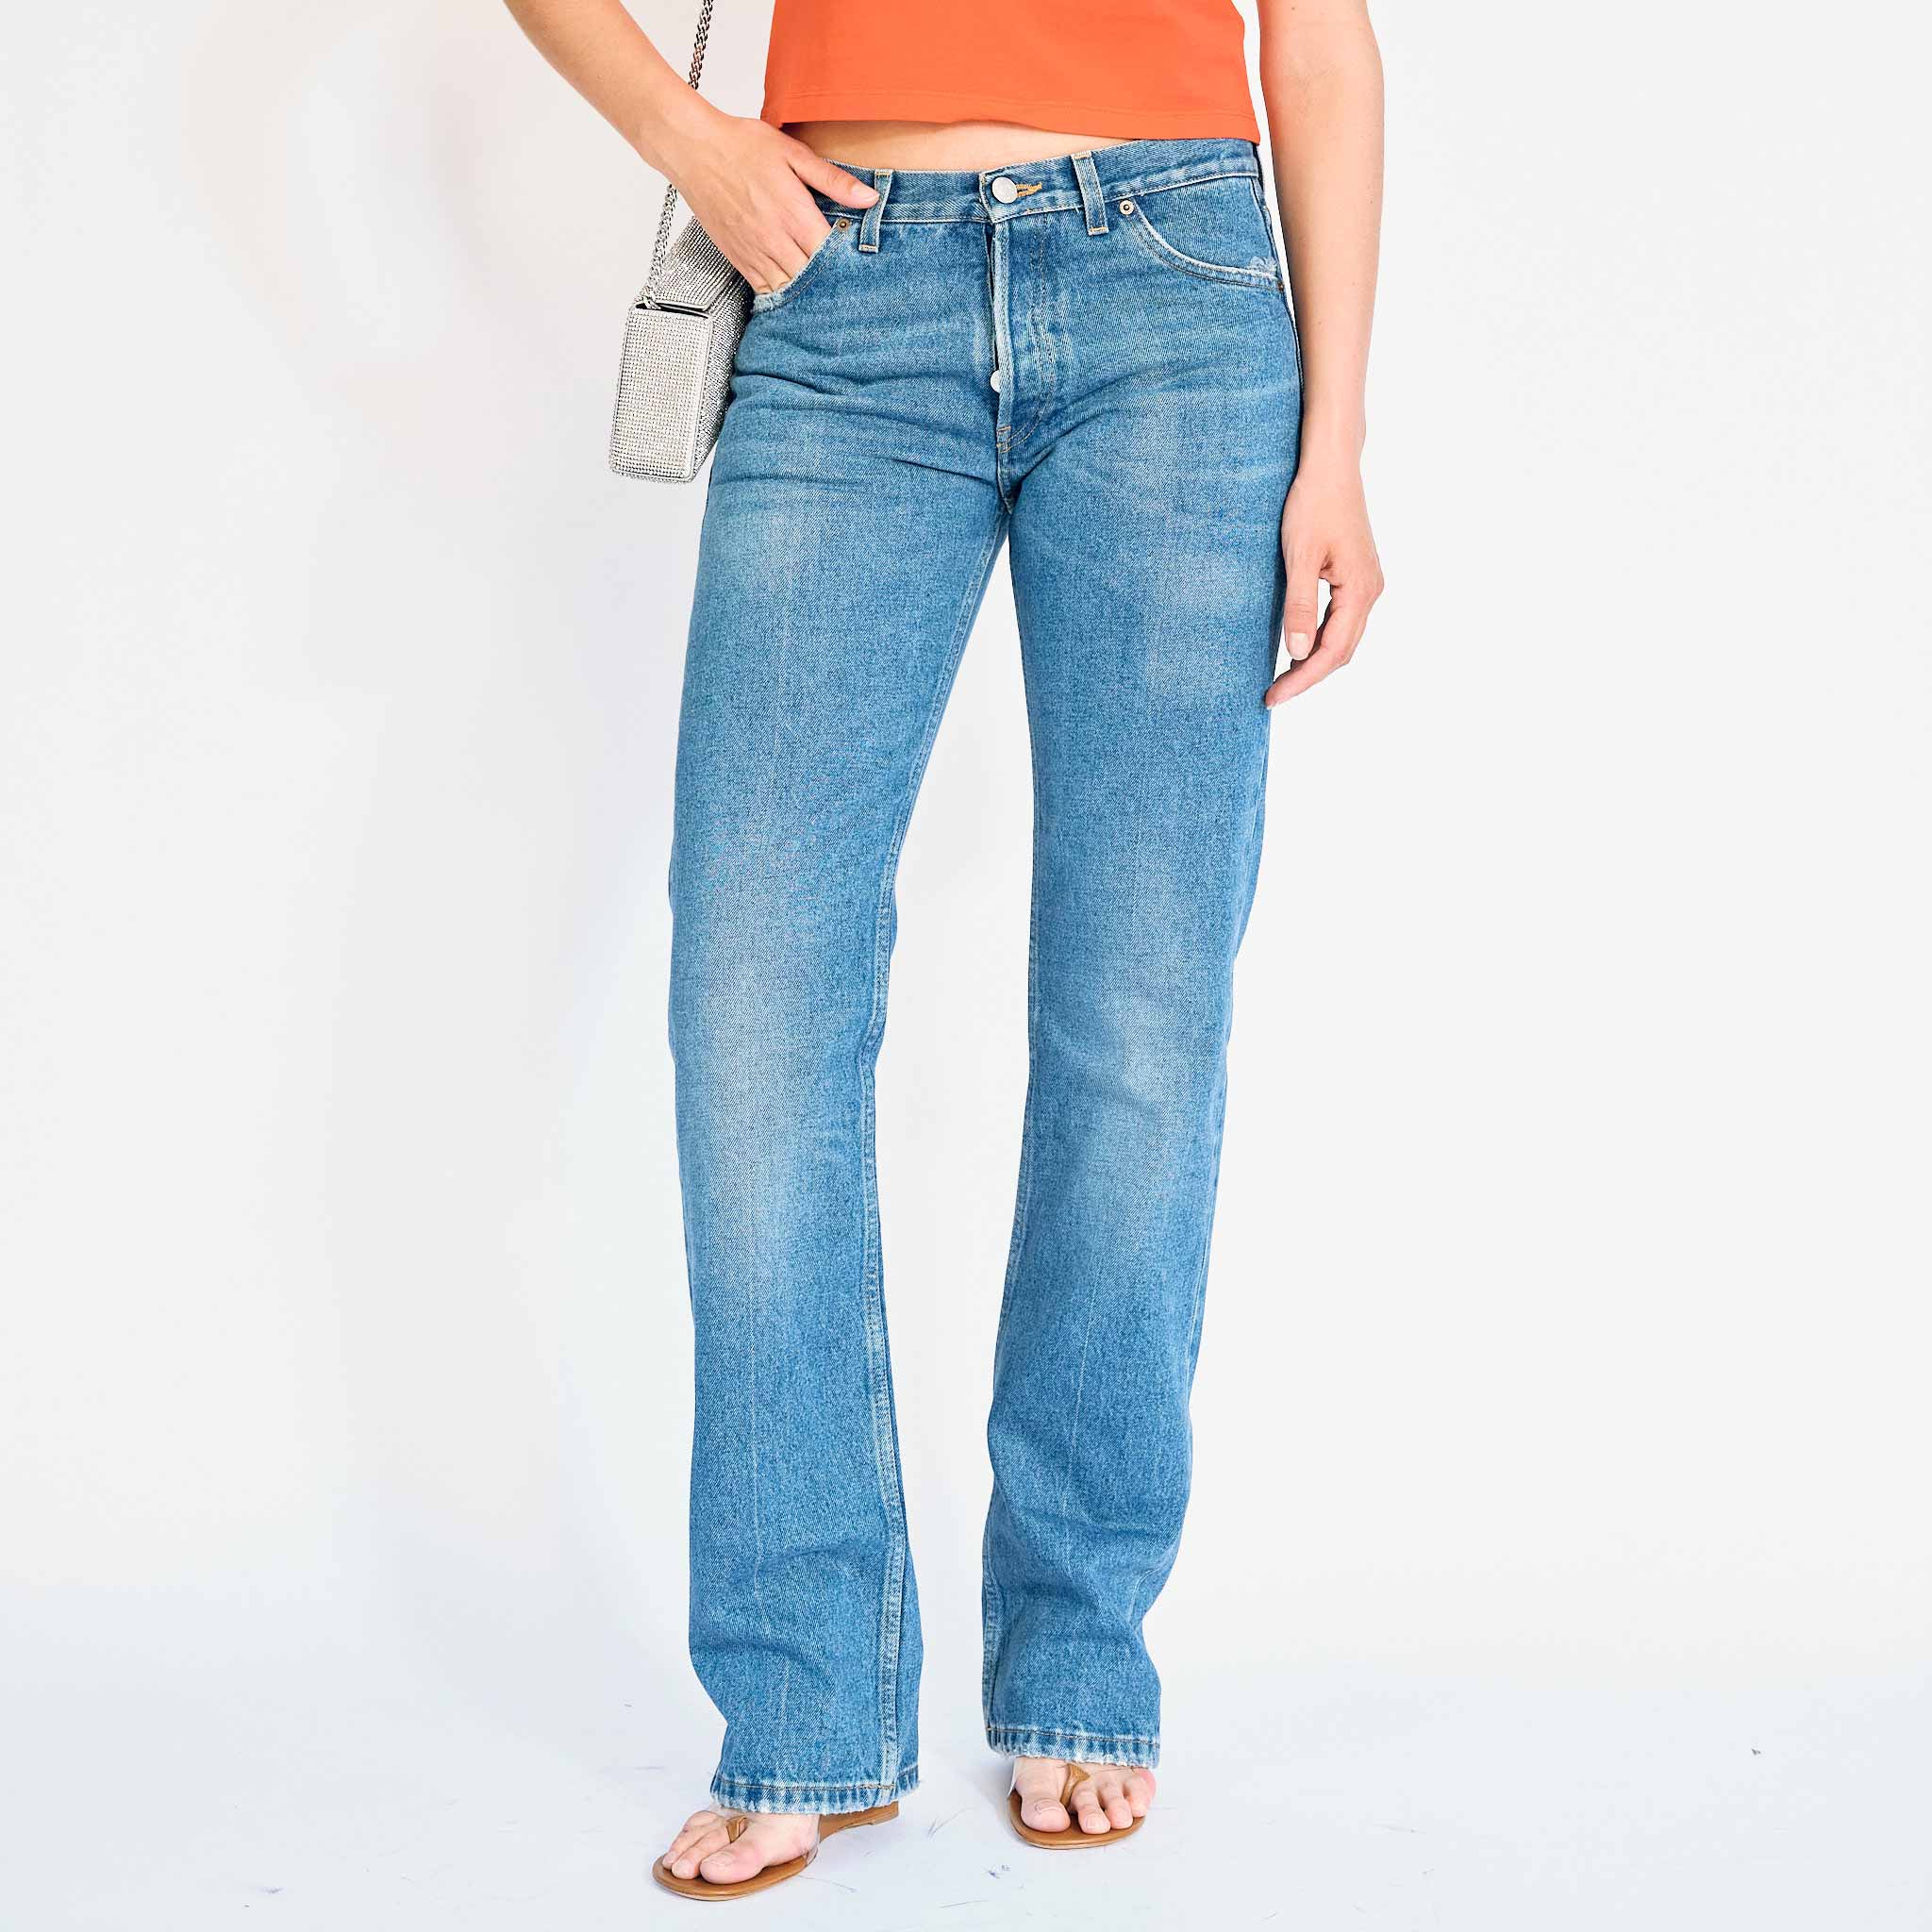 Martine Rose classic womens low rise jeans on a model - detail view.